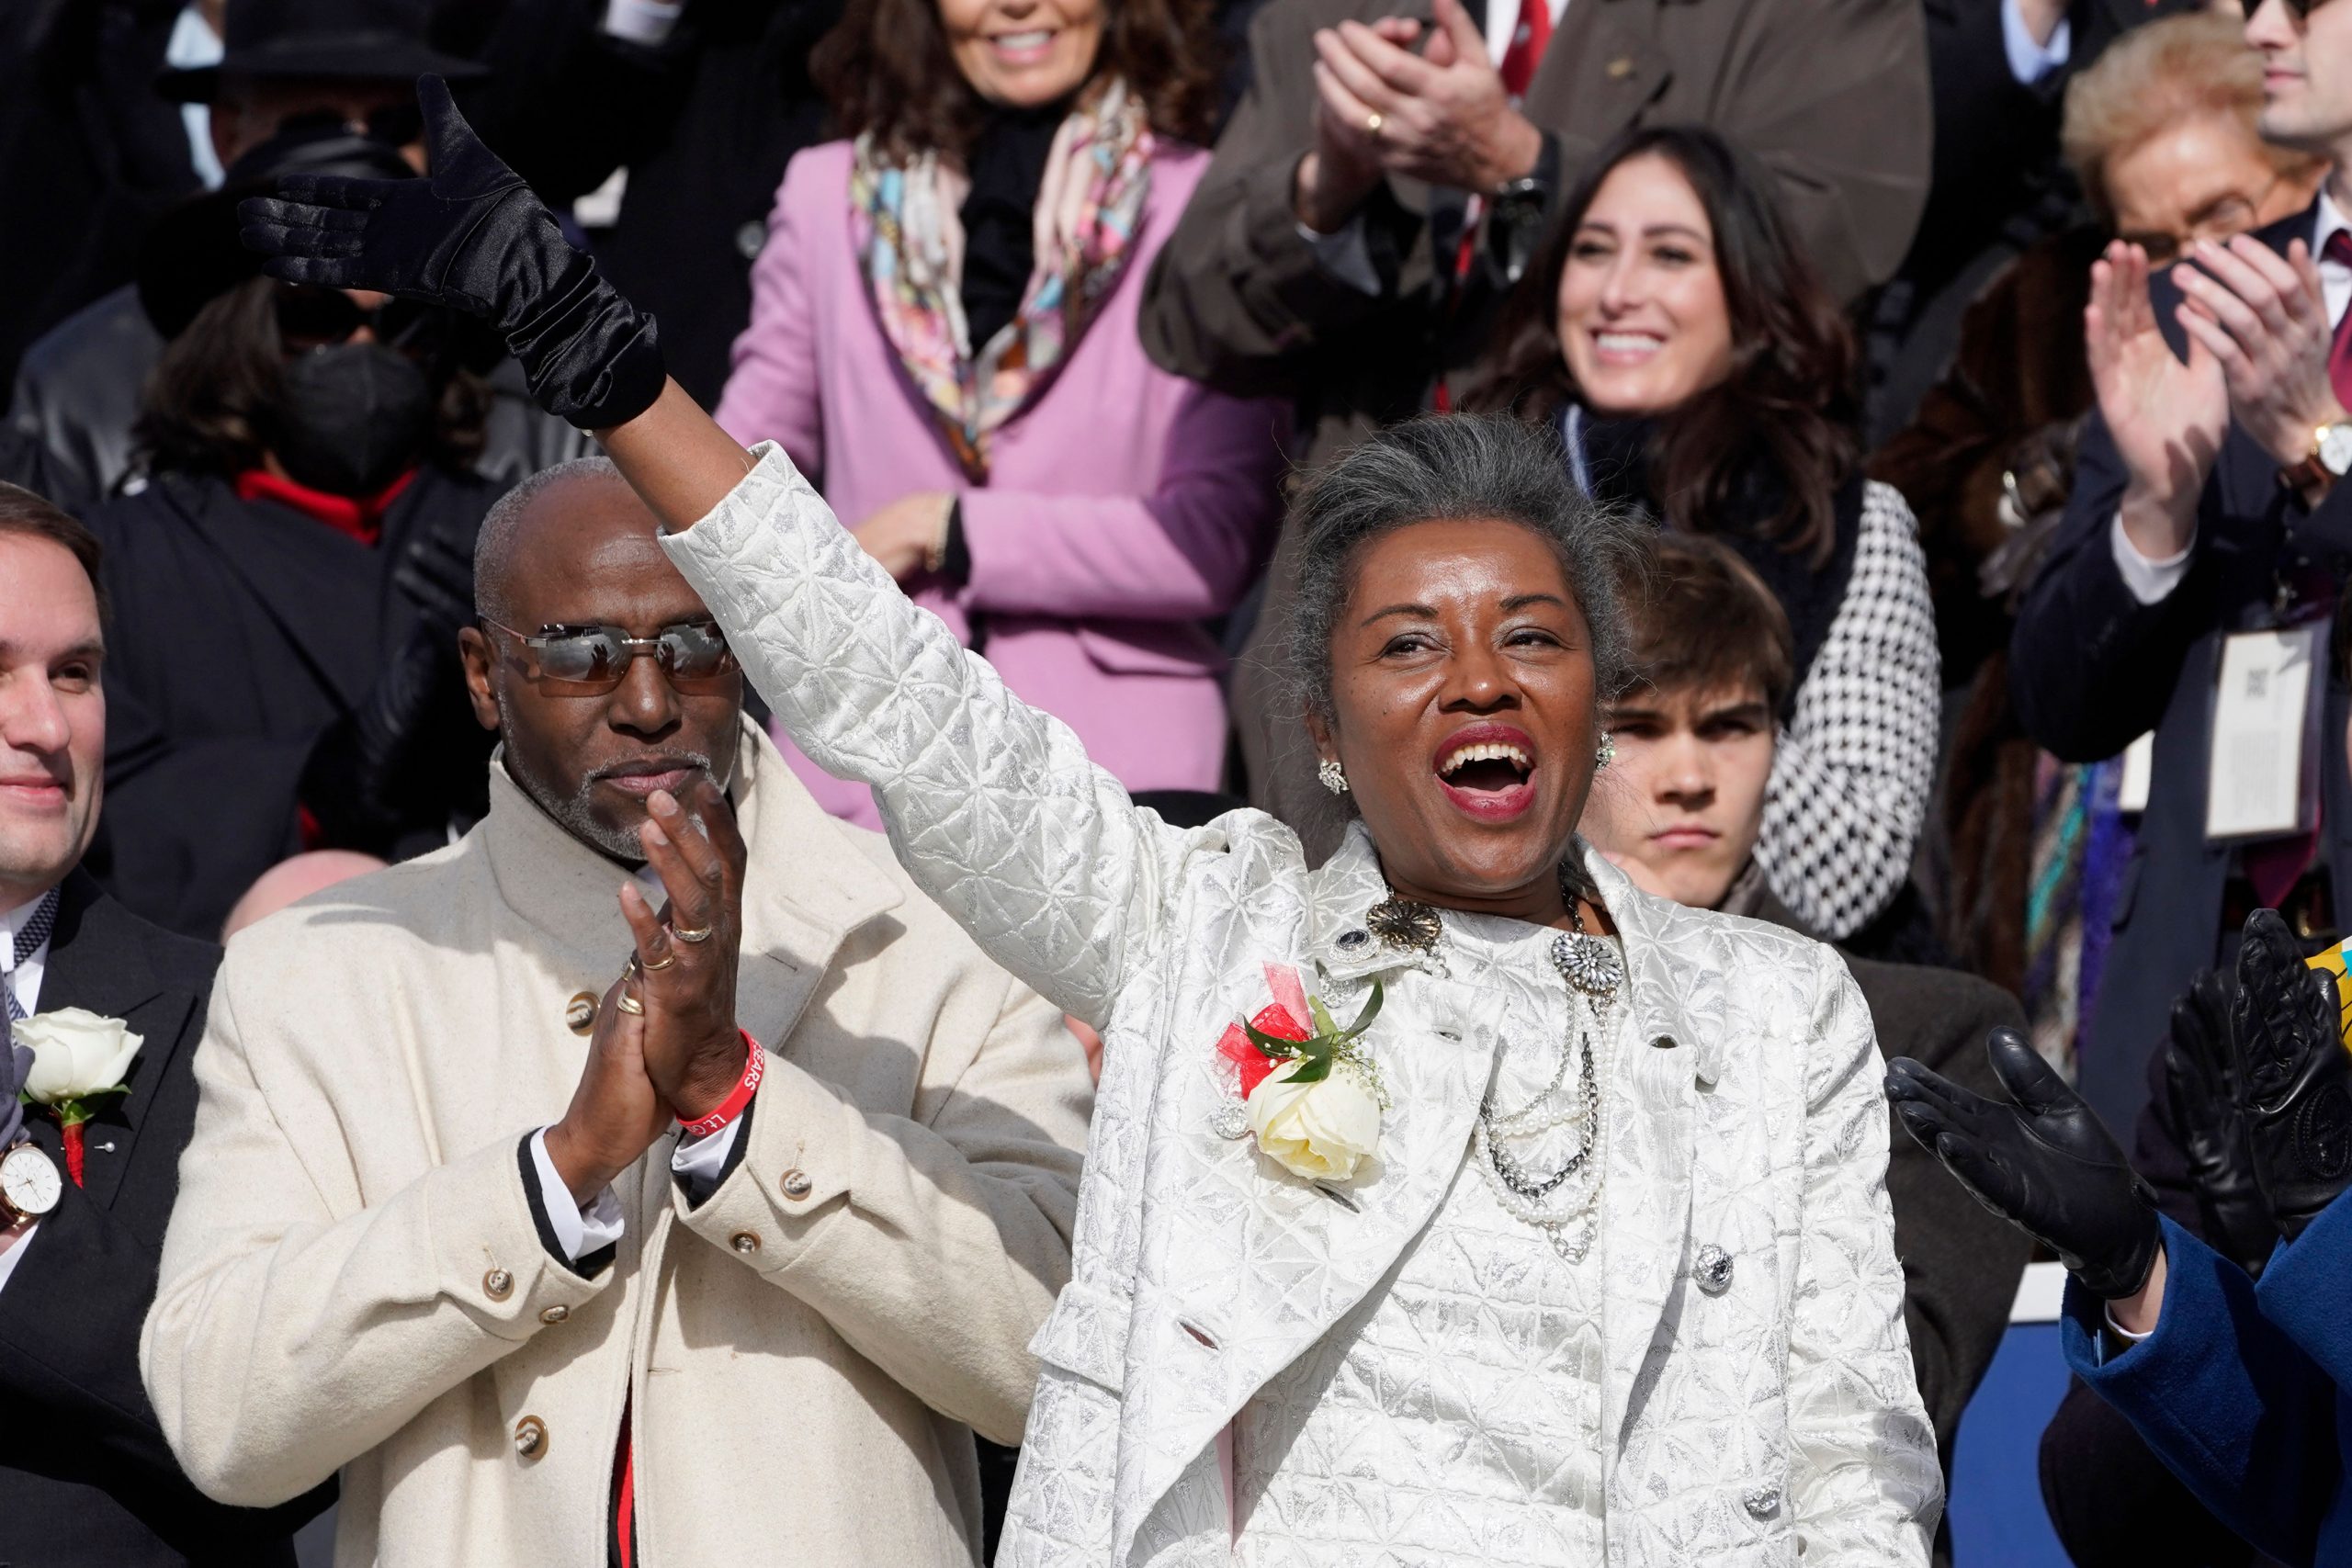 Virginia’s 1st female lieutenant governor Winsome Earle-Sears takes her seat in the Senate